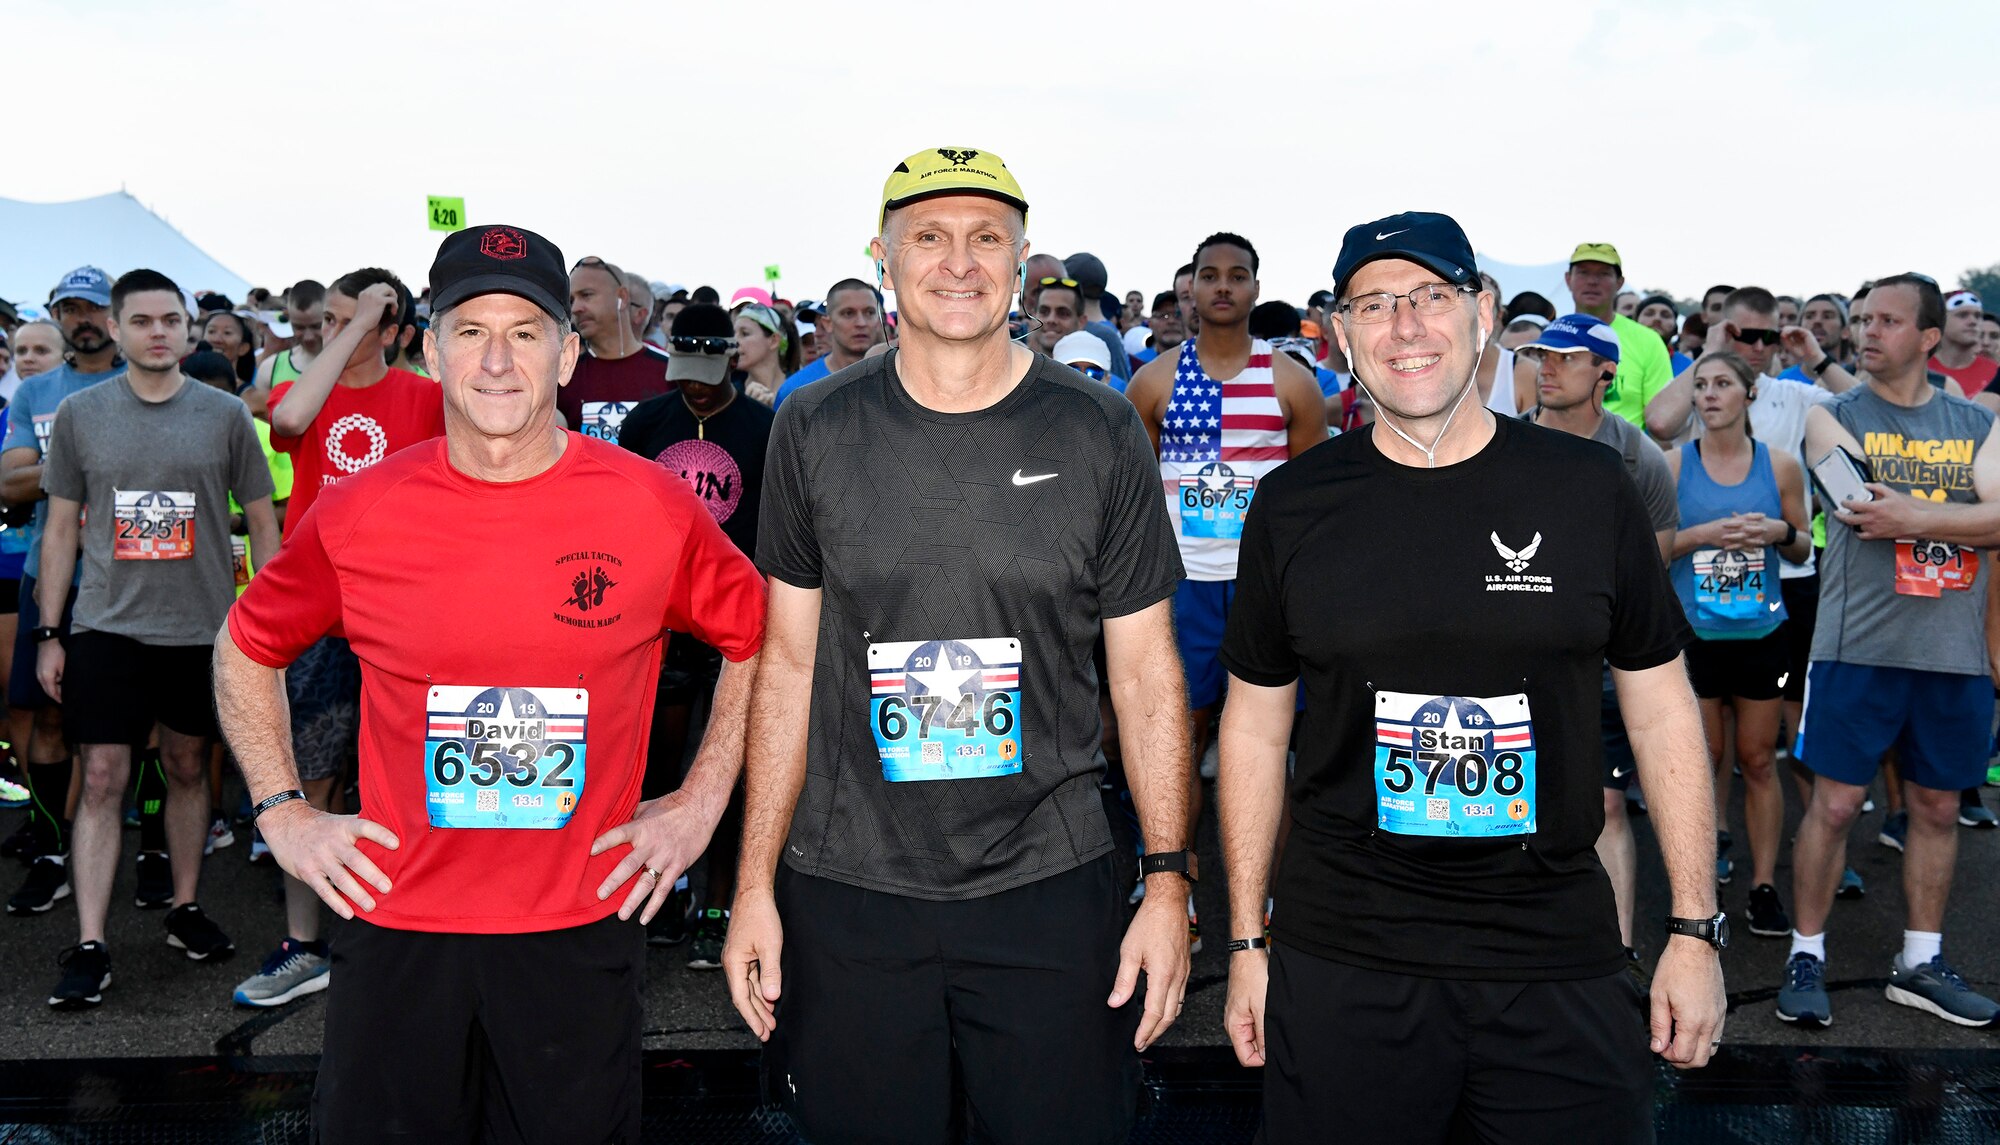 Air Force Chief of Staff Gen. David L. Goldfein, Air Force Materiel Command’s commander, Gen. Arnold W. Bunch Jr., and Chief Master Sgt. Stanley Cadell, AFMC Command Chief, prepare to run the half-marathon in the 23rd Air Force Marathon, hosted by Wright-Patterson Air Force Base, Ohio, Sept. 21, 2019. The marathon attracts more than 13,500 runners yearly, and the course spans through the adjacent towns, celebrating the birthday and the history of the U.S. Air Force. (U.S. Air Force photo by Scott M. Ash)